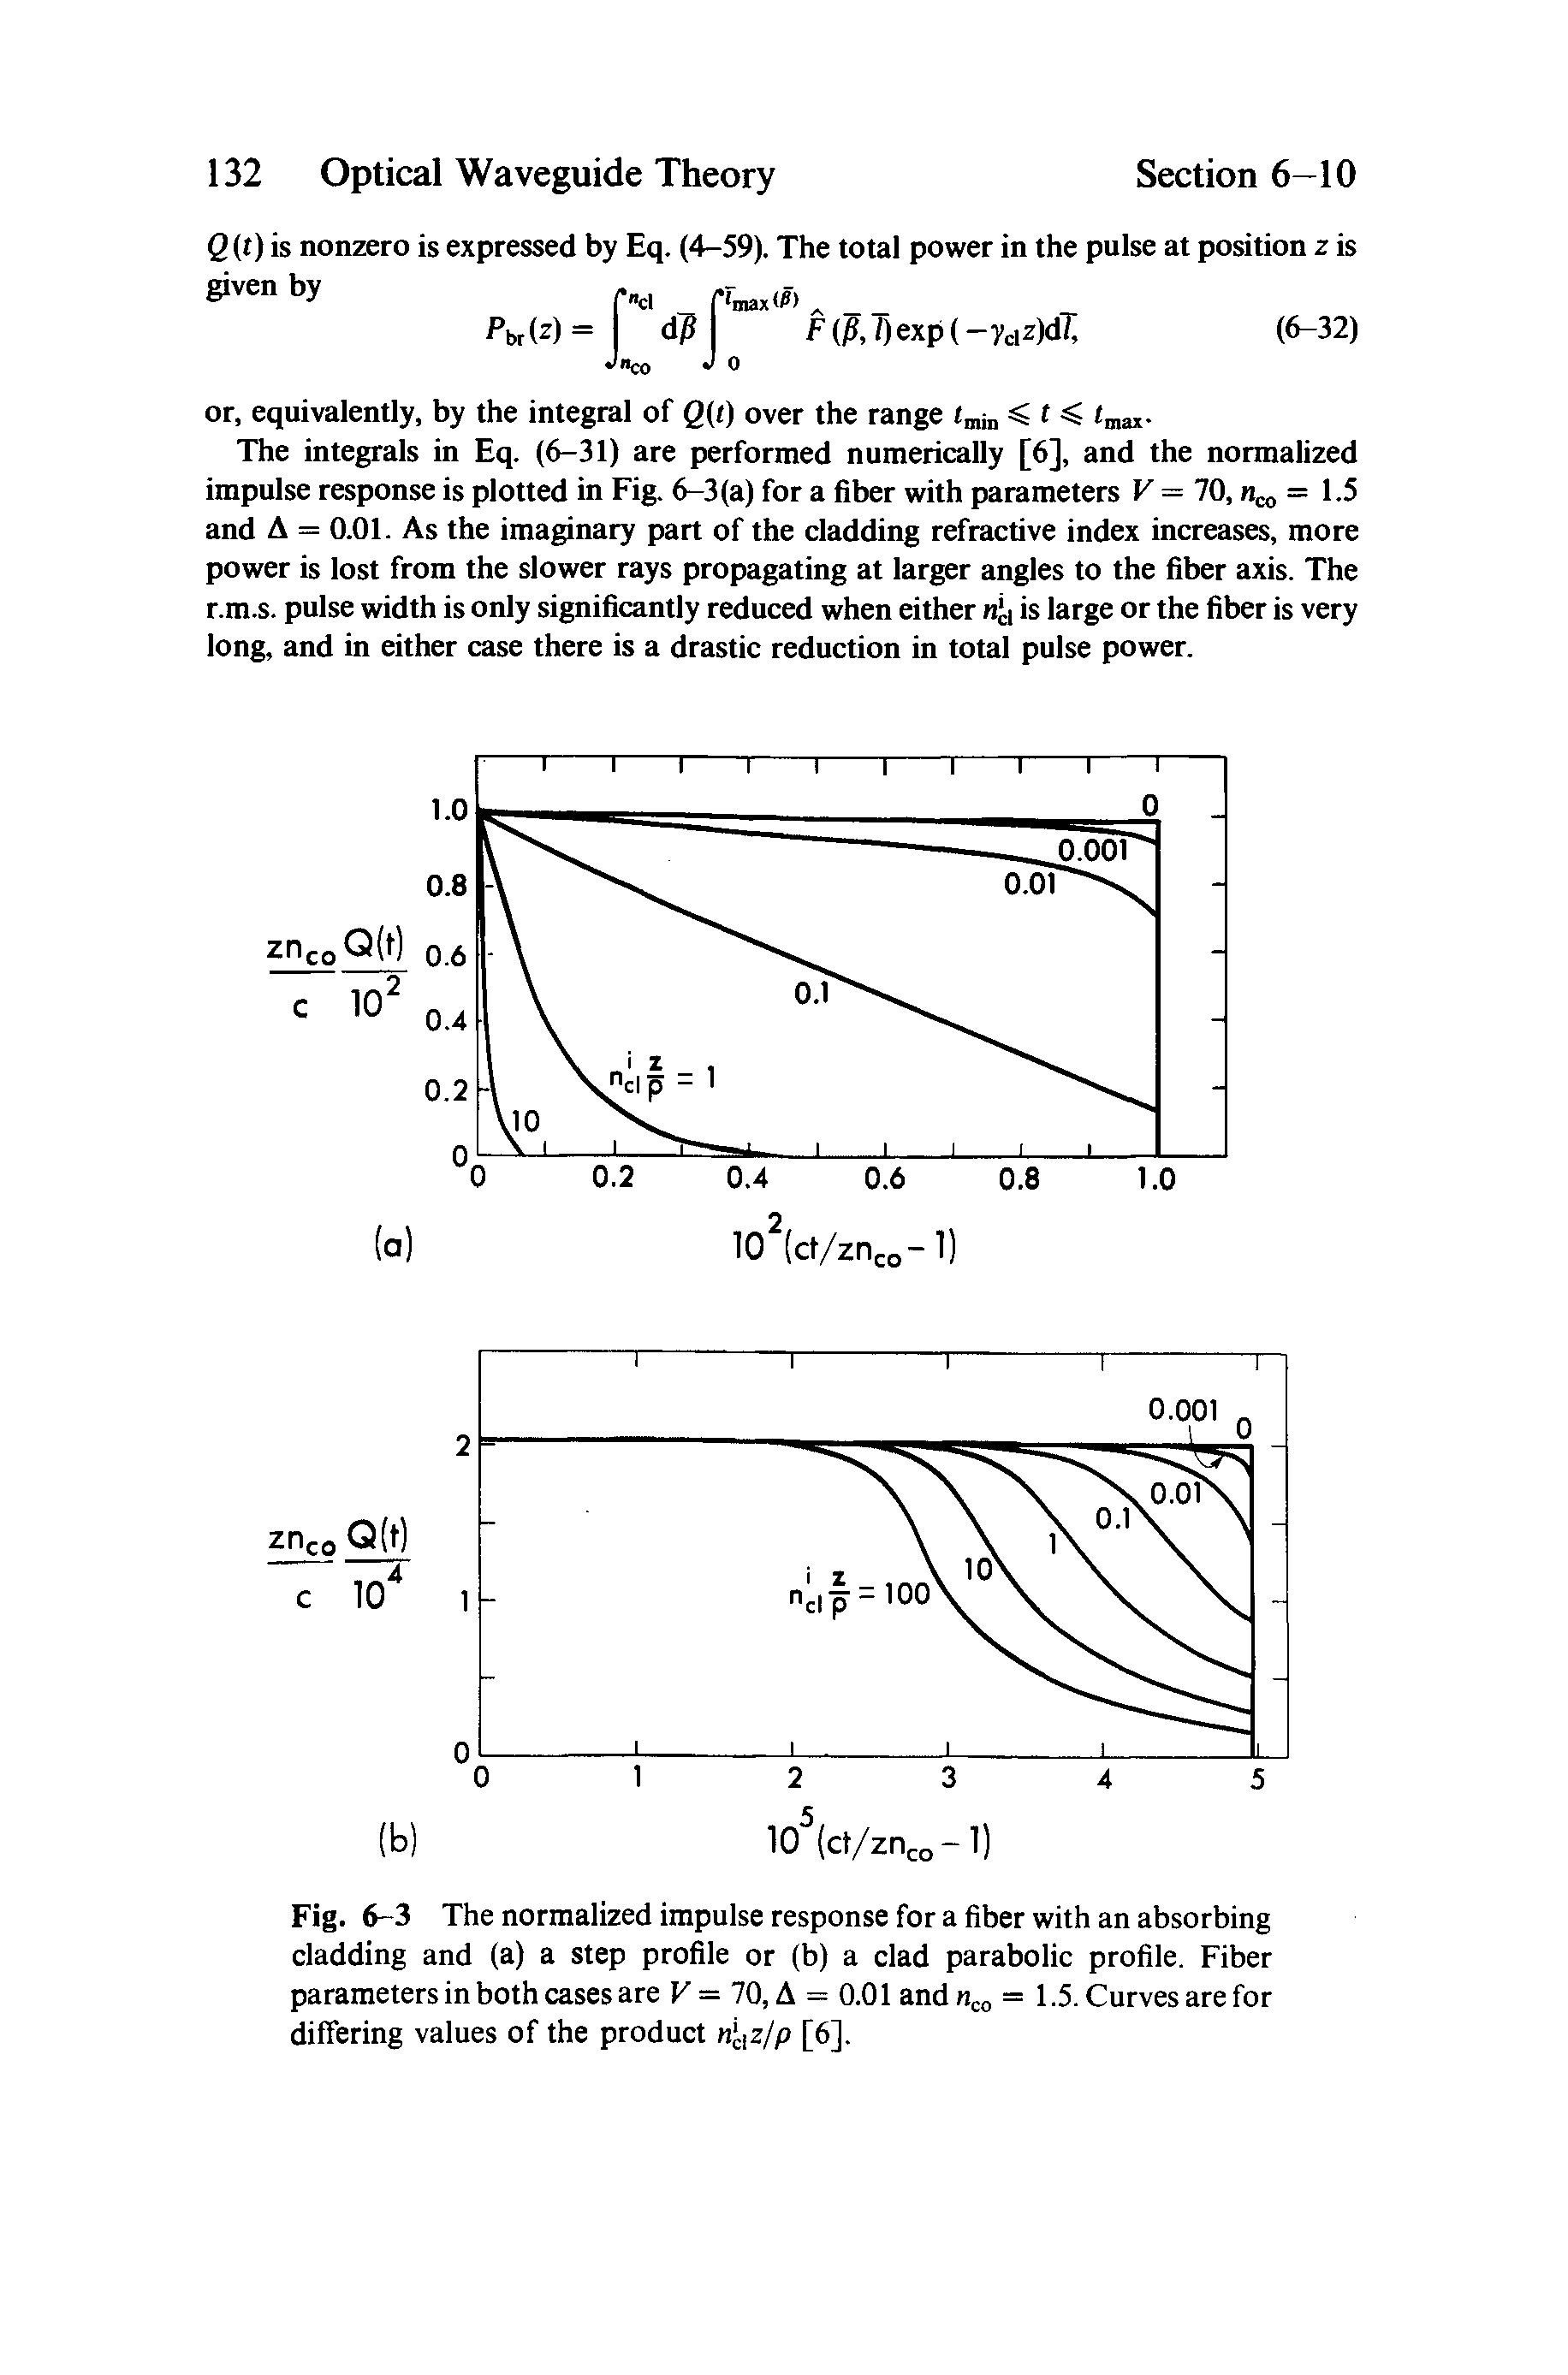 Fig. 6-3 The normalized impulse response for a fiber with an absorbing cladding and (a) a step profile or (b) a clad parabolic profile. Fiber parameters in both cases are K = 70, A = 0.01 and co = 1 -5. Curves are for differing values of the product iiz/p [6],...